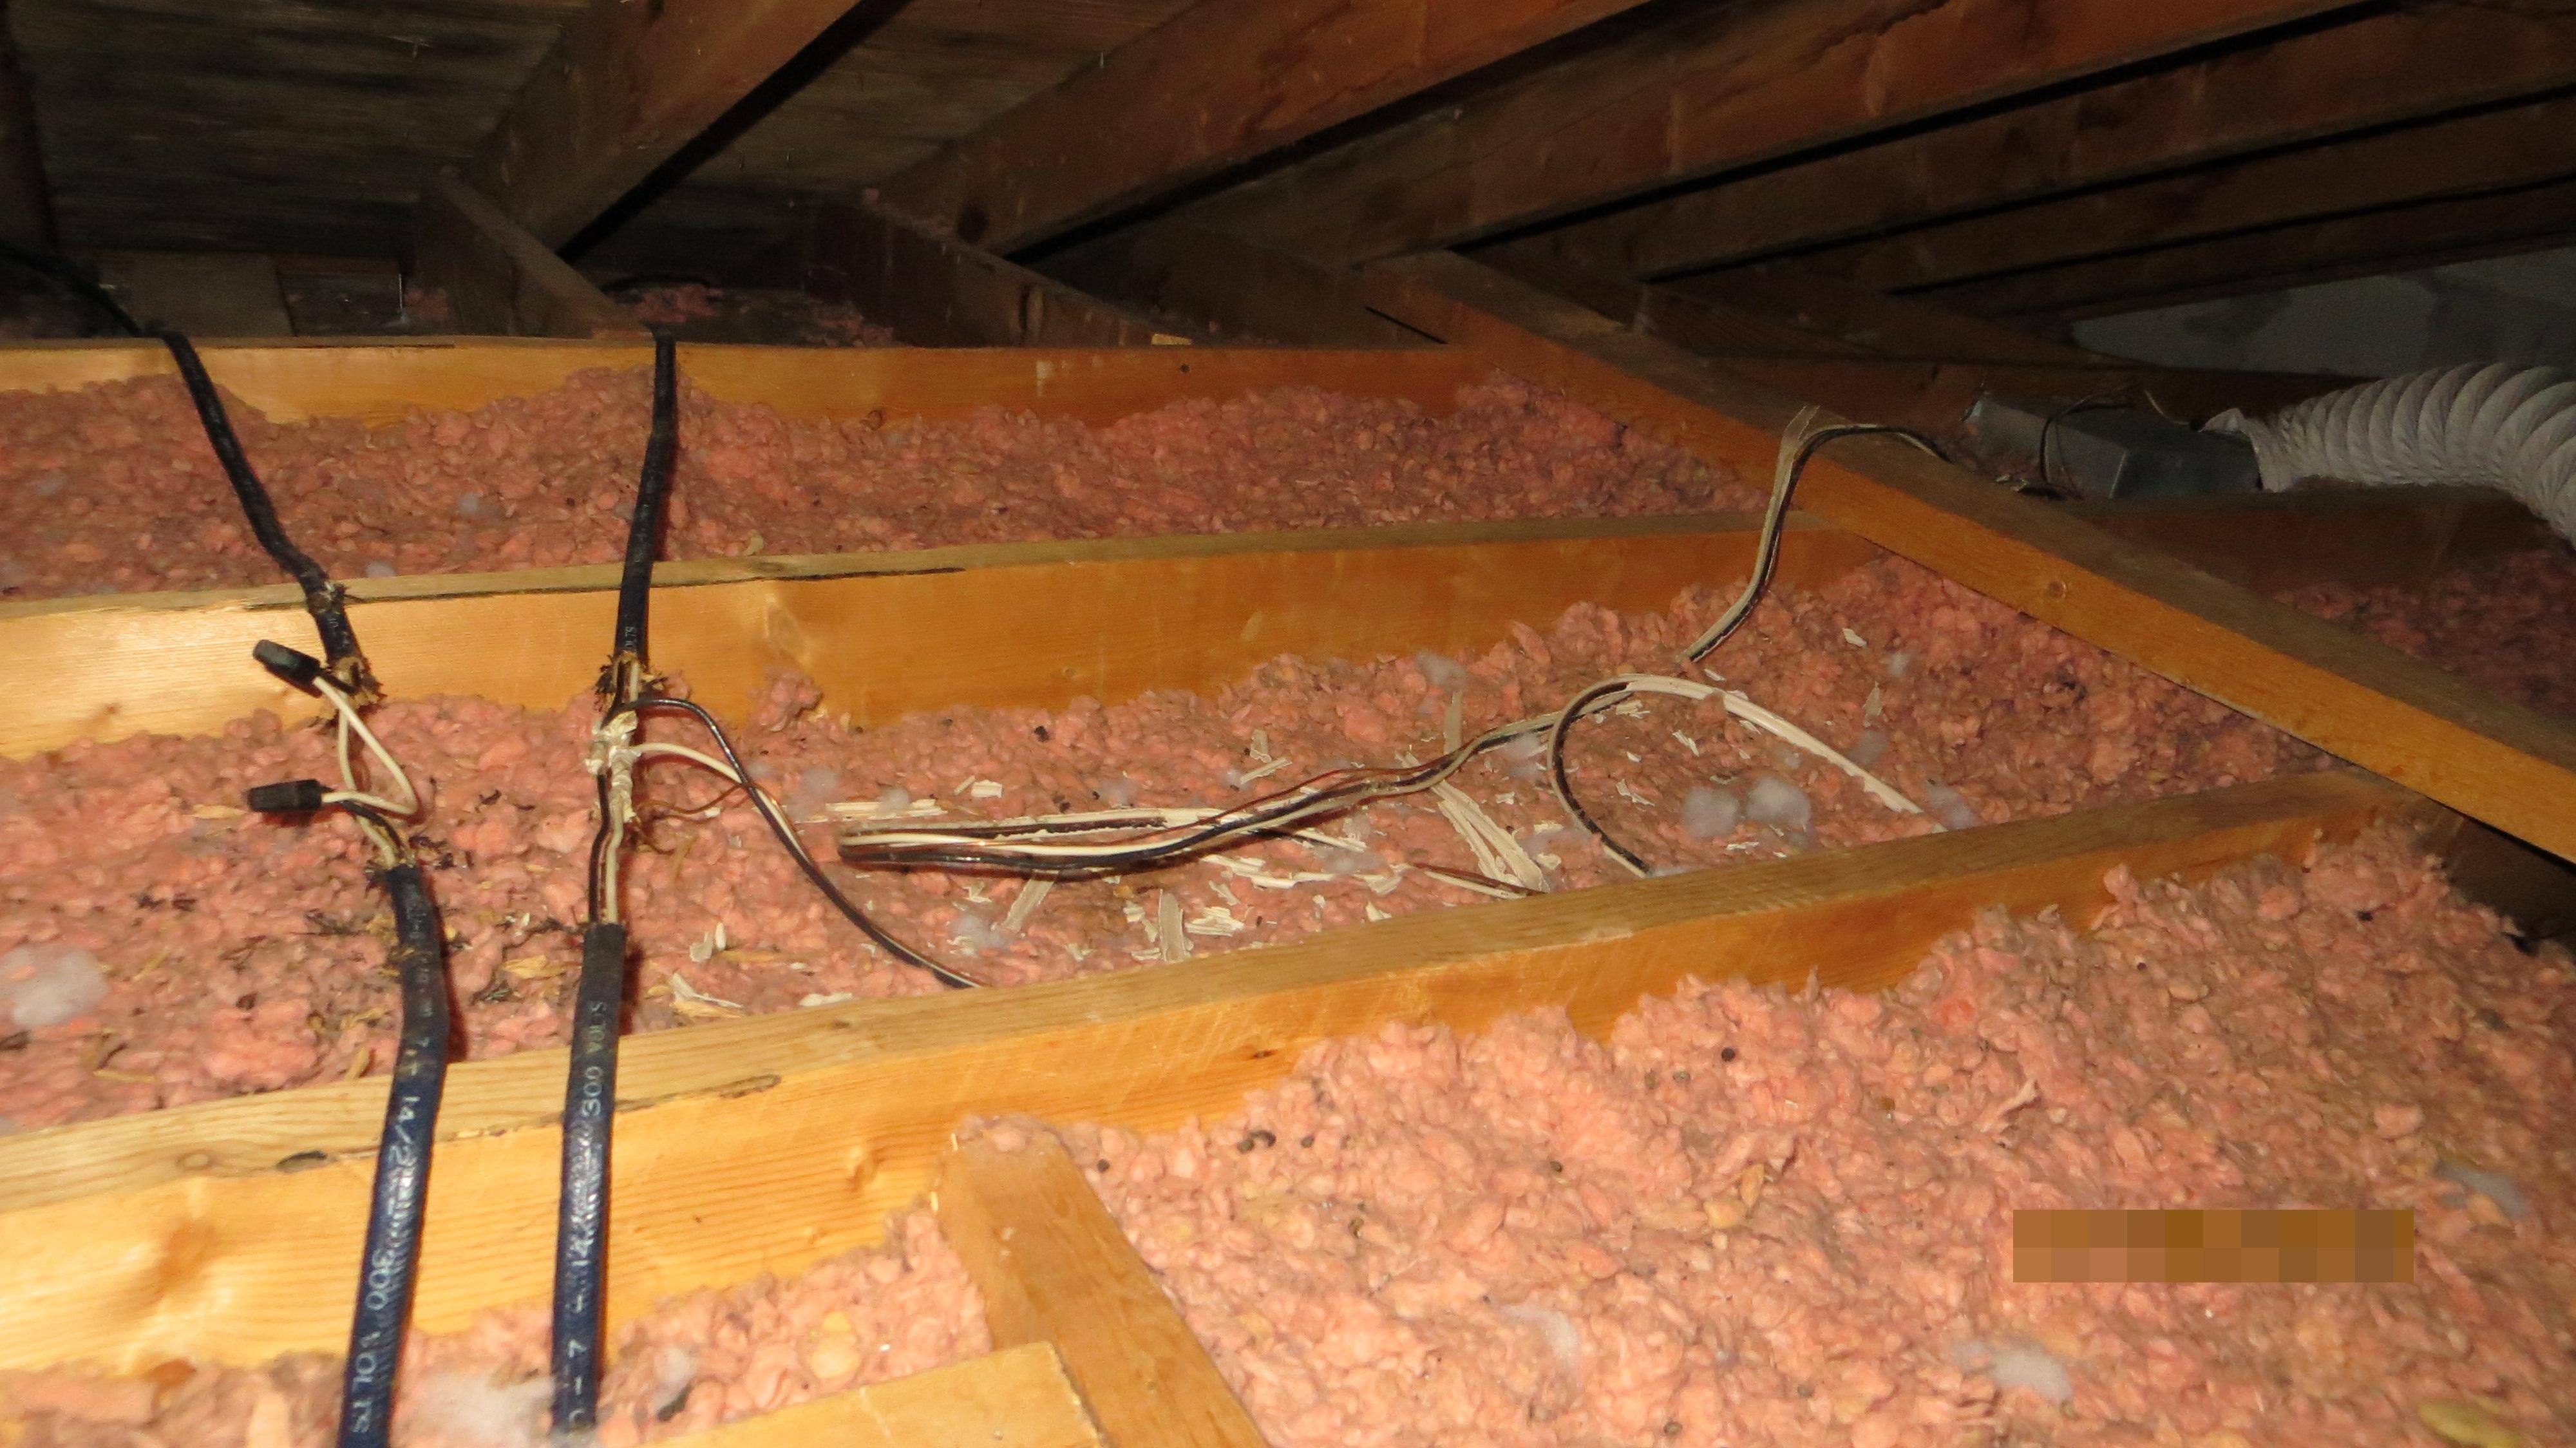 Loose wiring connections in Attic,fire hazard